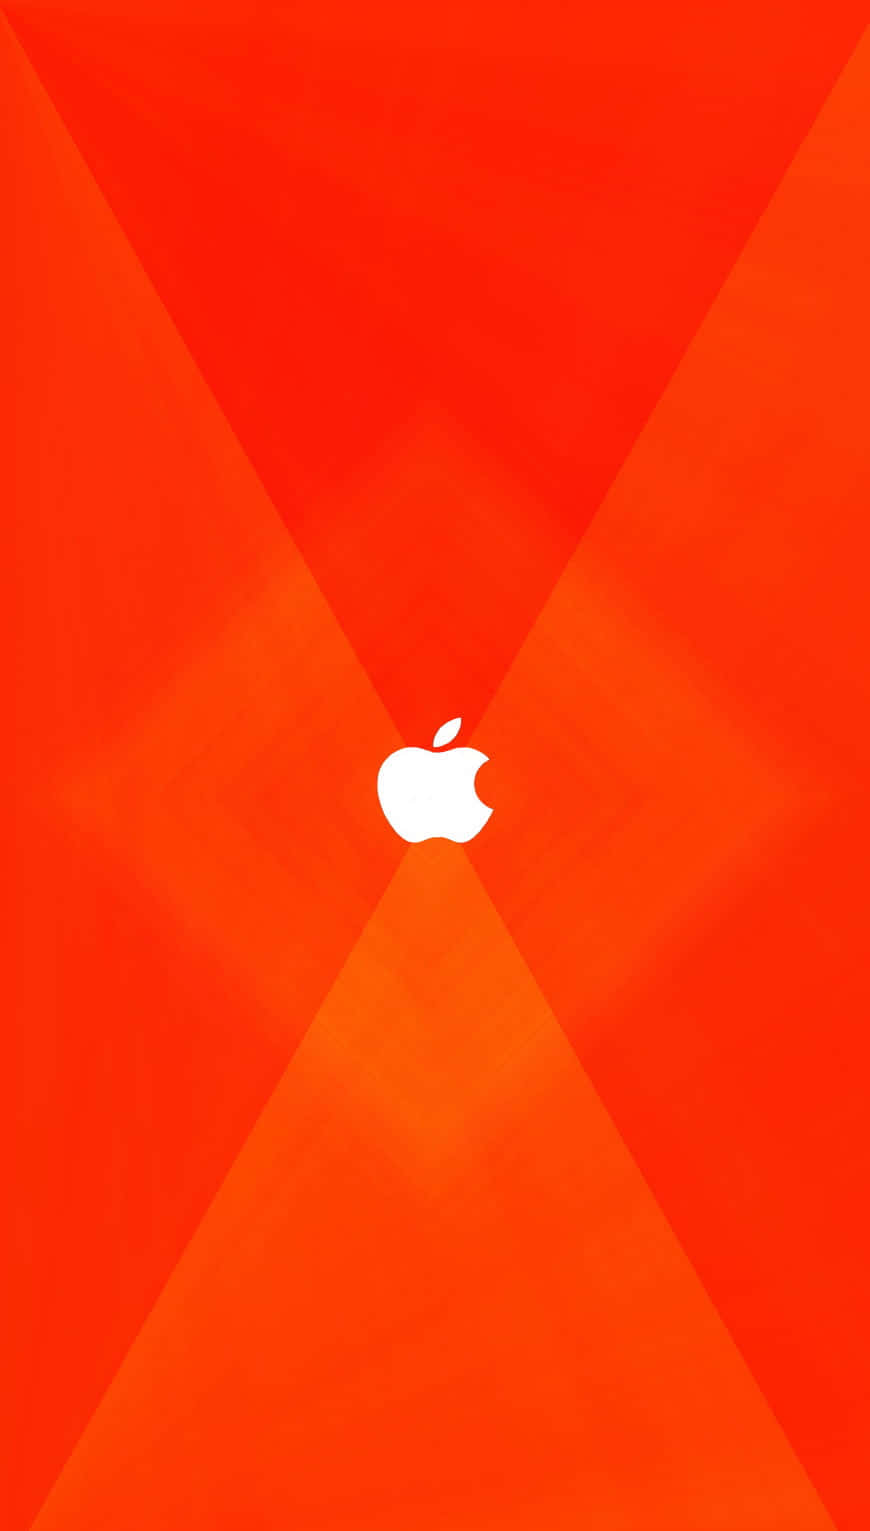 Get the sleek and stylish Iphone 5c Wallpaper